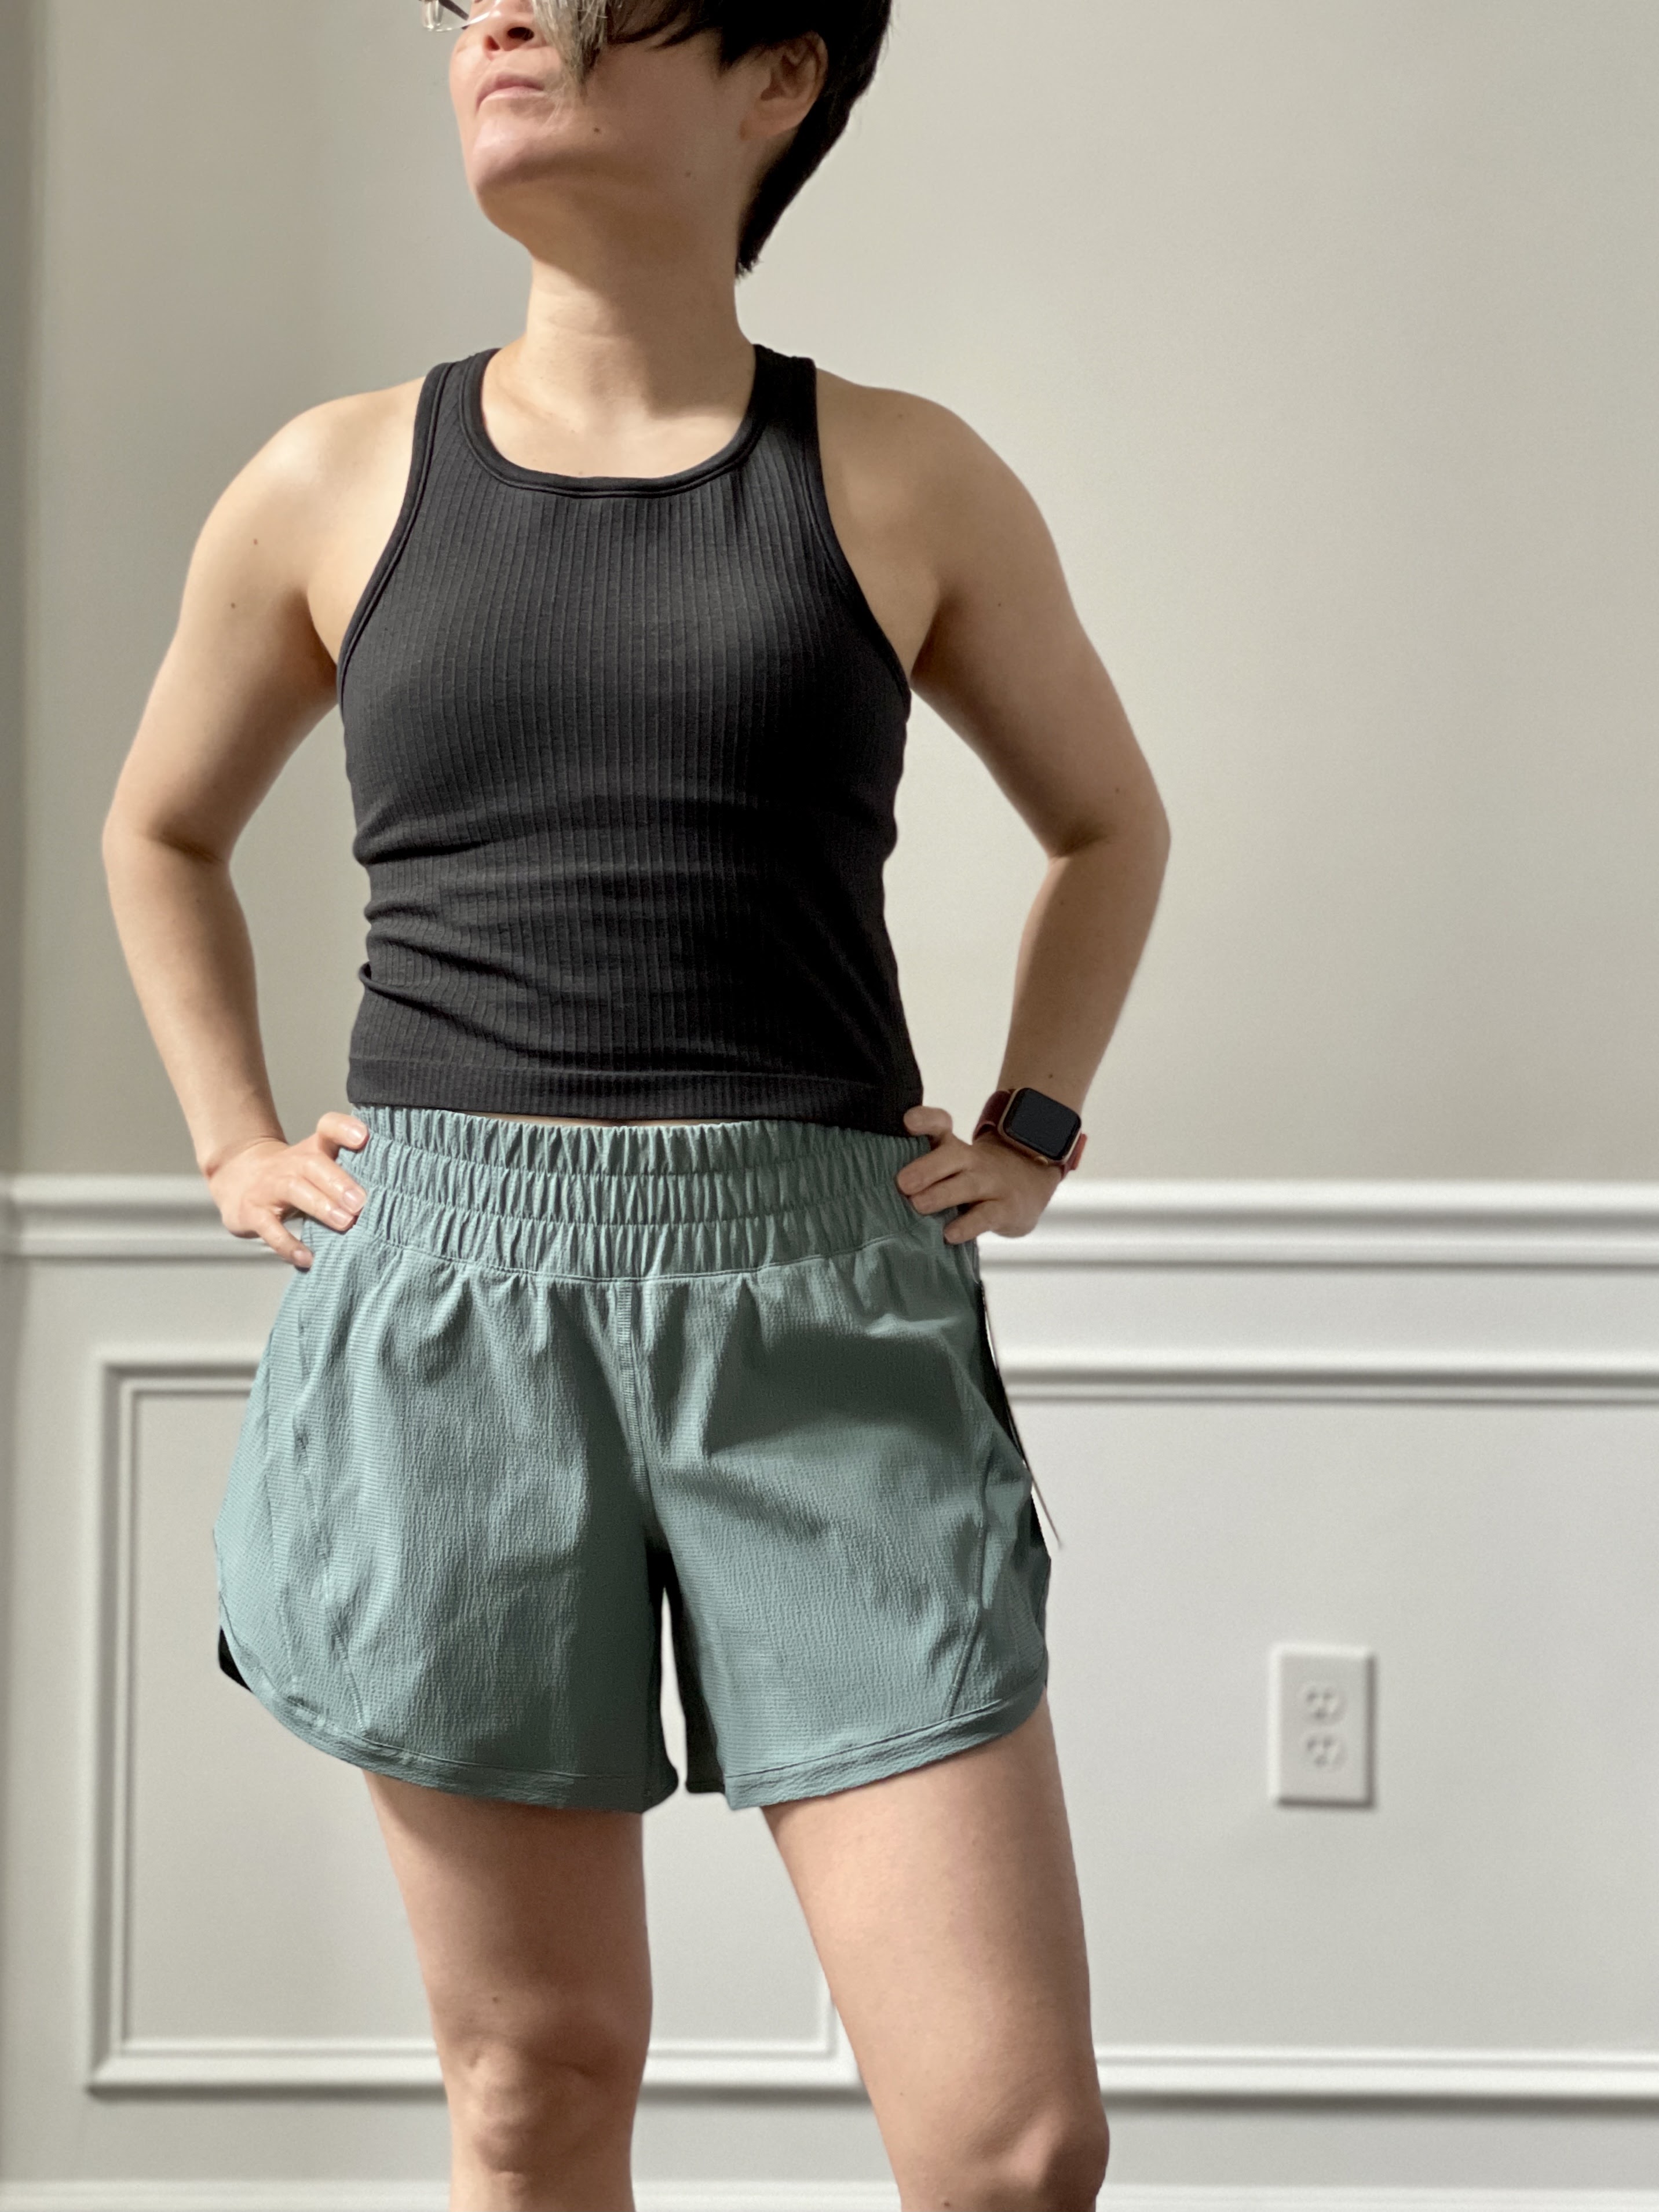 Fit Review Friday! Track That Mid Rise Short 5 inch, Wide Leg High